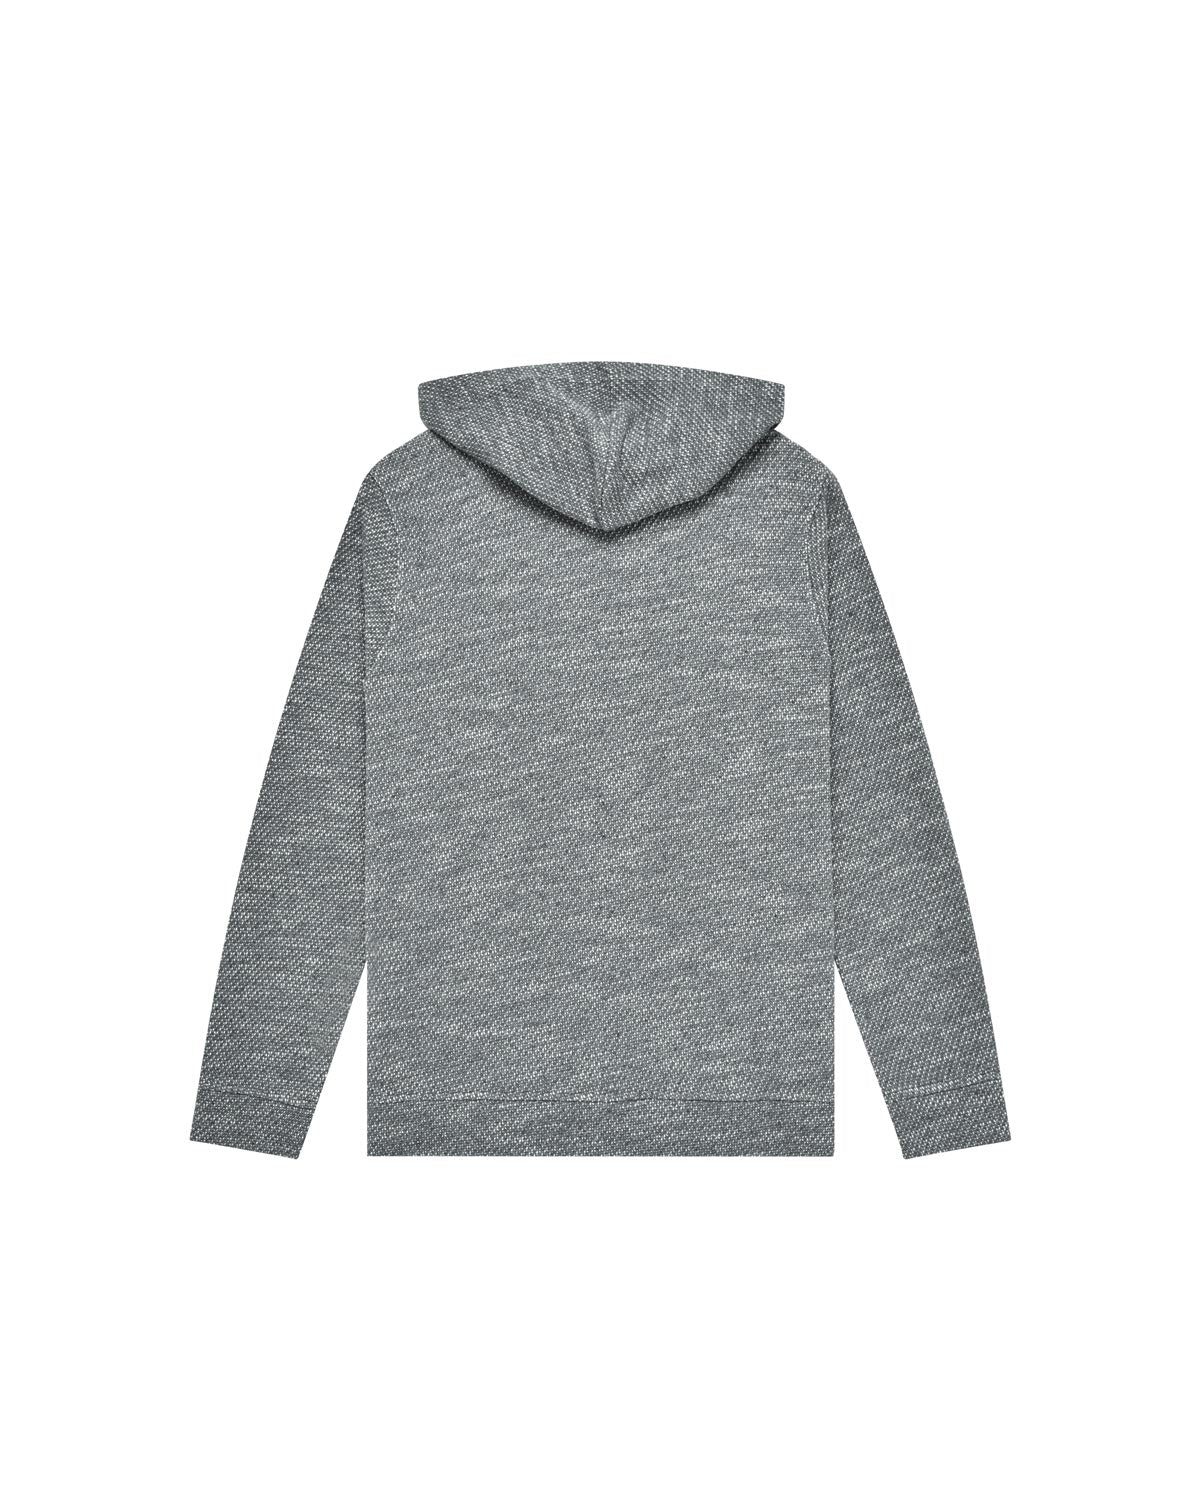 Man | Anthracite-coloured knitted pullover with hood and zip